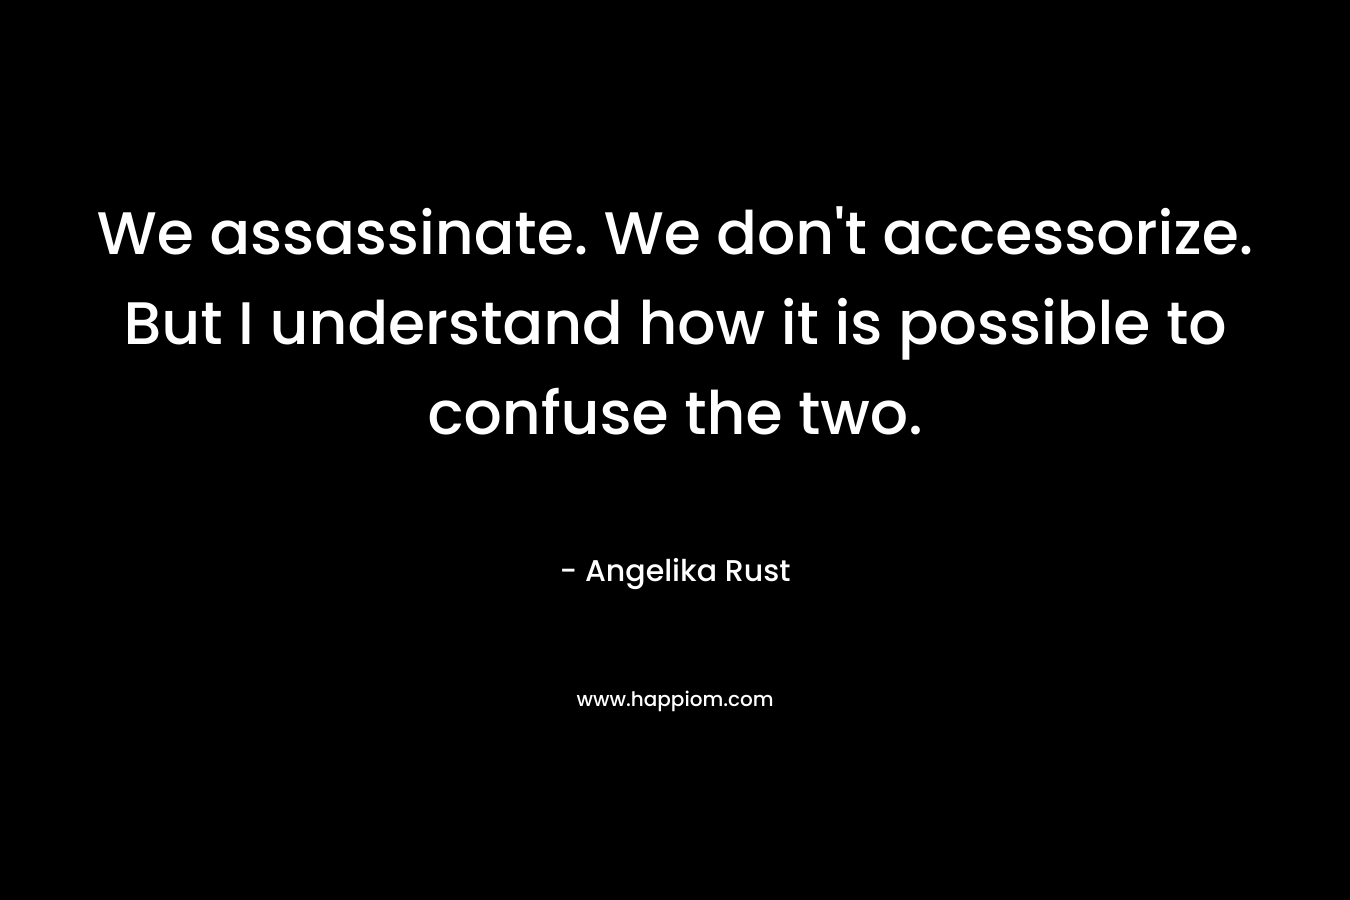 We assassinate. We don't accessorize. But I understand how it is possible to confuse the two.